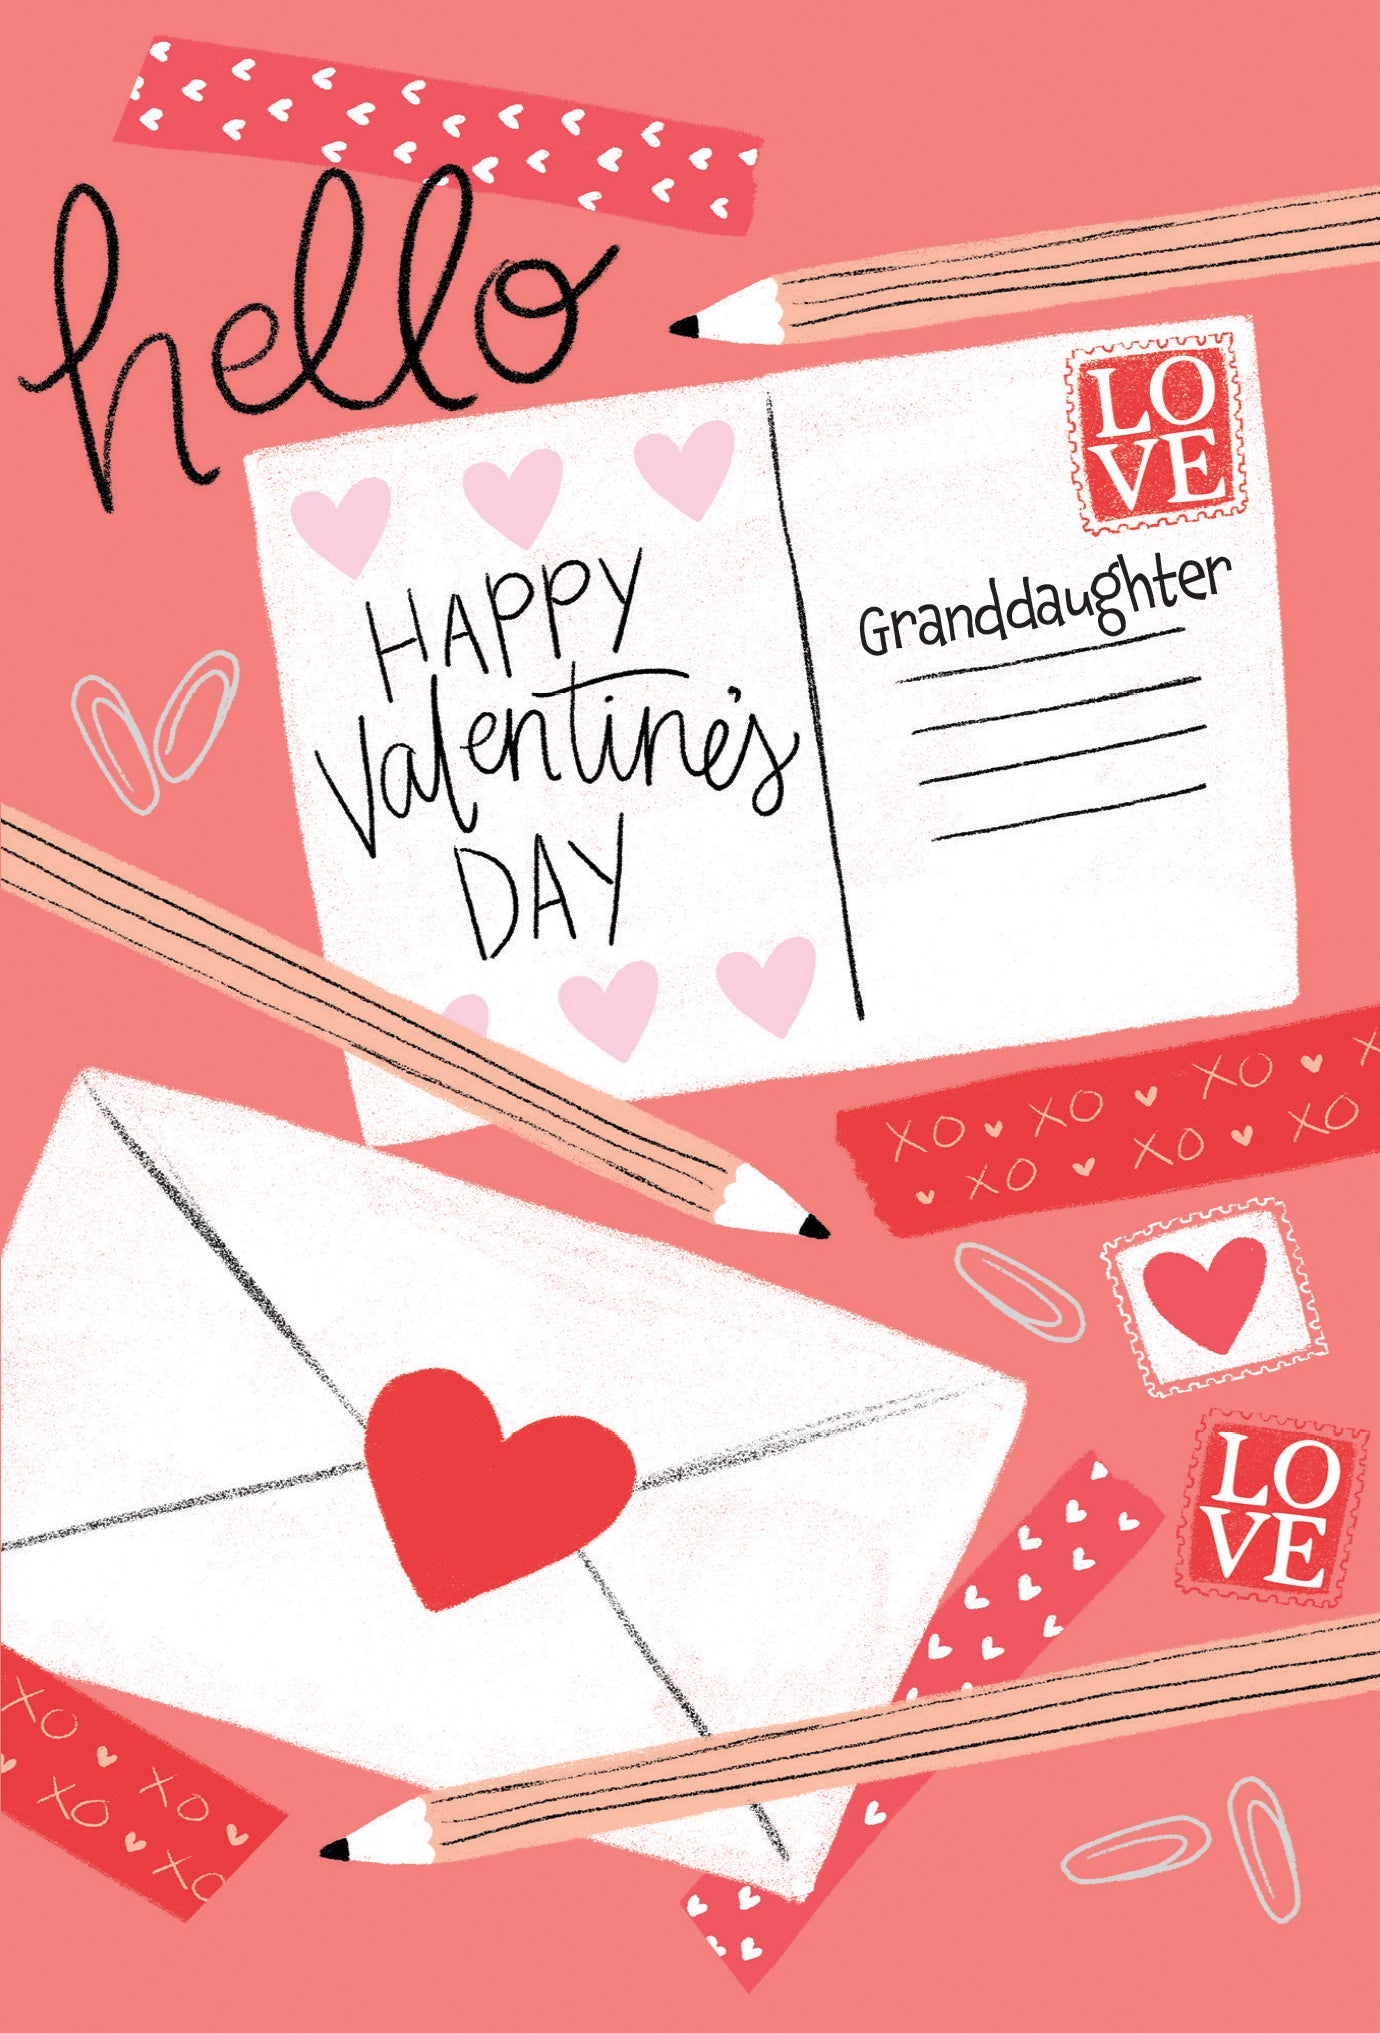 Favorite People Valentine's Card Pictura USA Greeting Cards